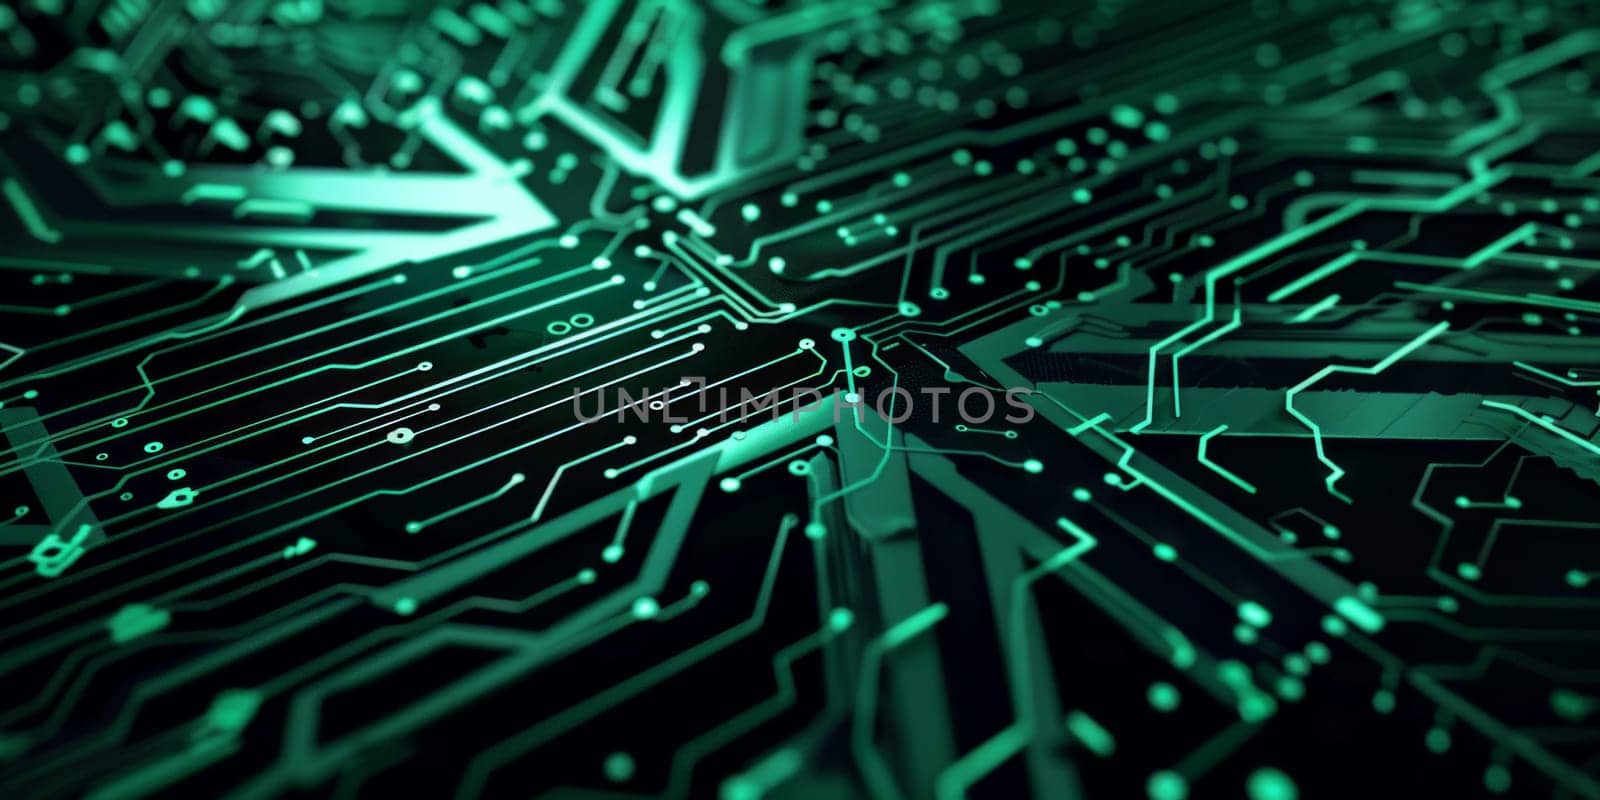 A close up of a green electronic circuit board. Concept of engineering technology applied to the environment and sustainability